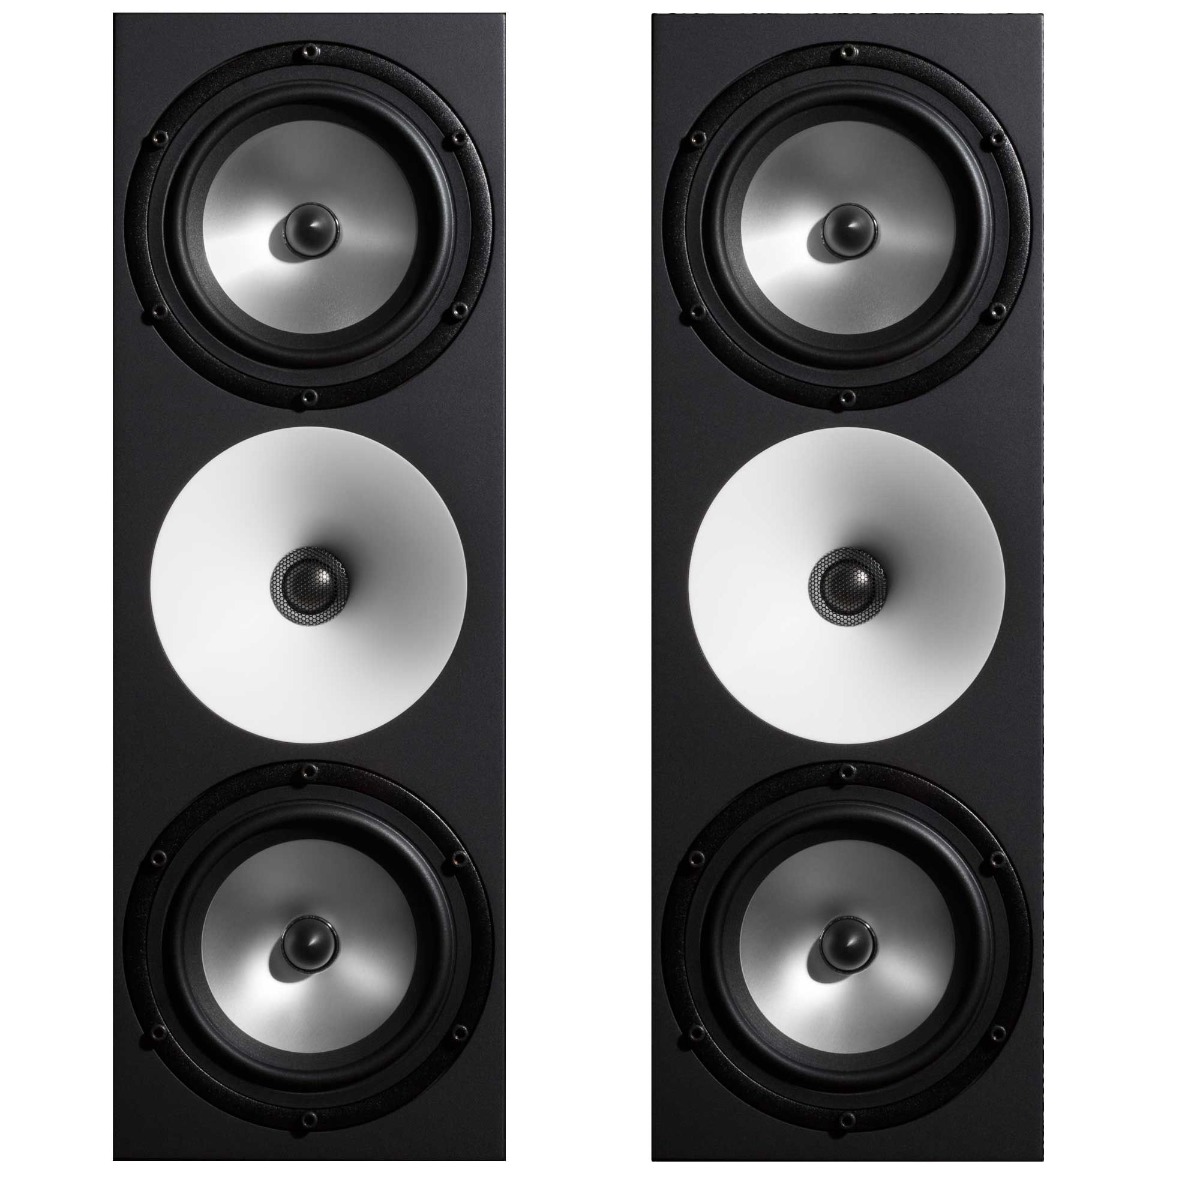 Amphion Two18 Pair